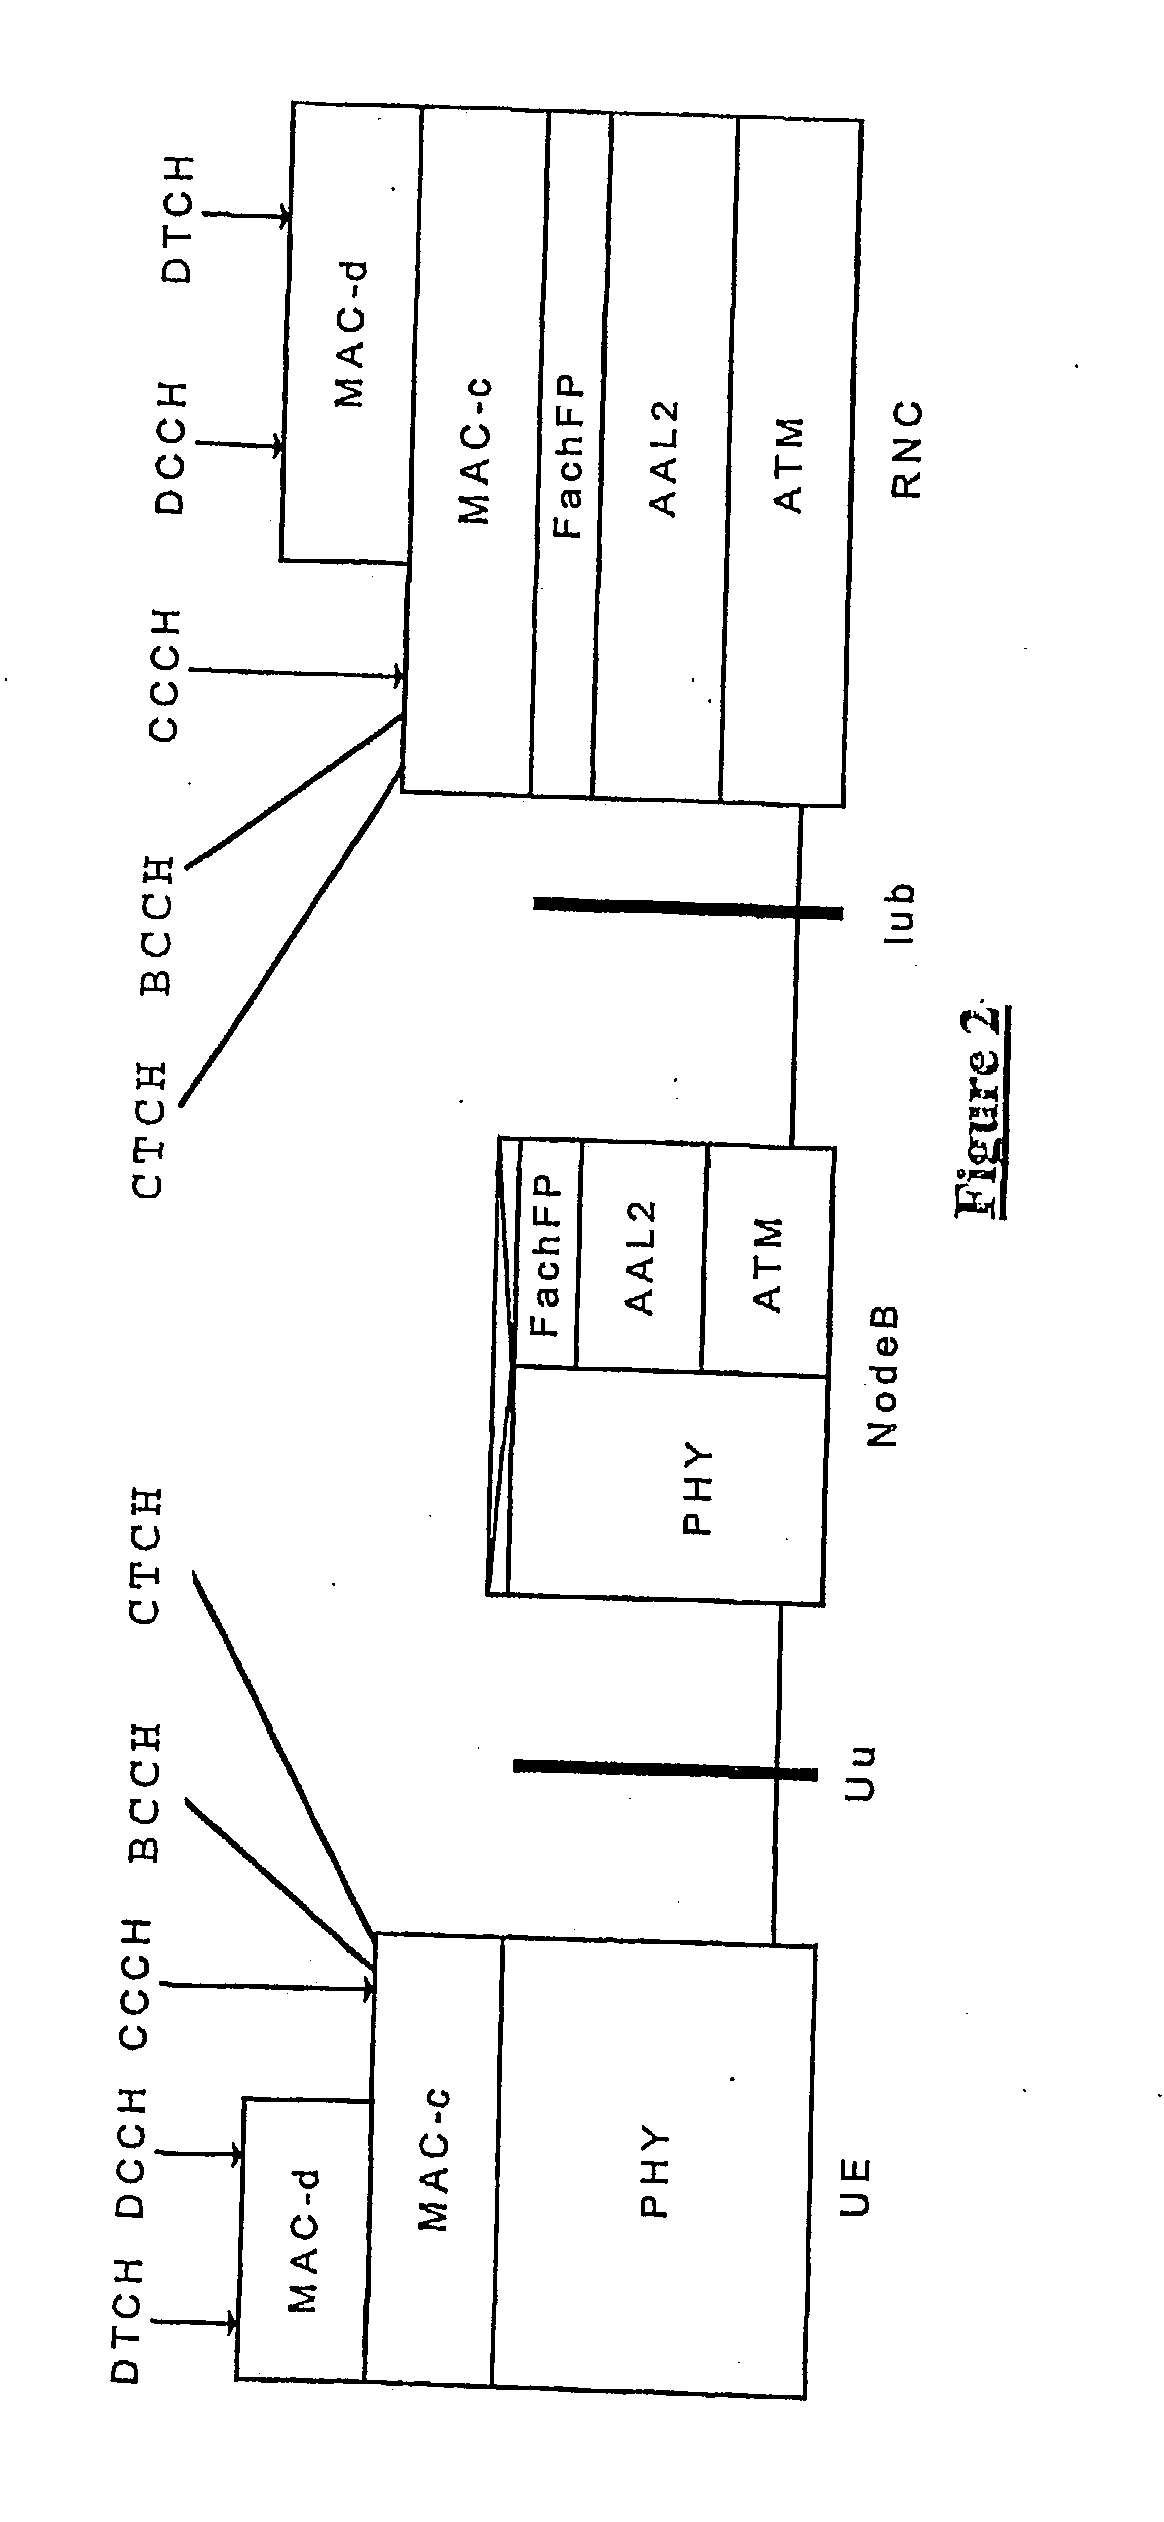 Transport channel control in a umts network